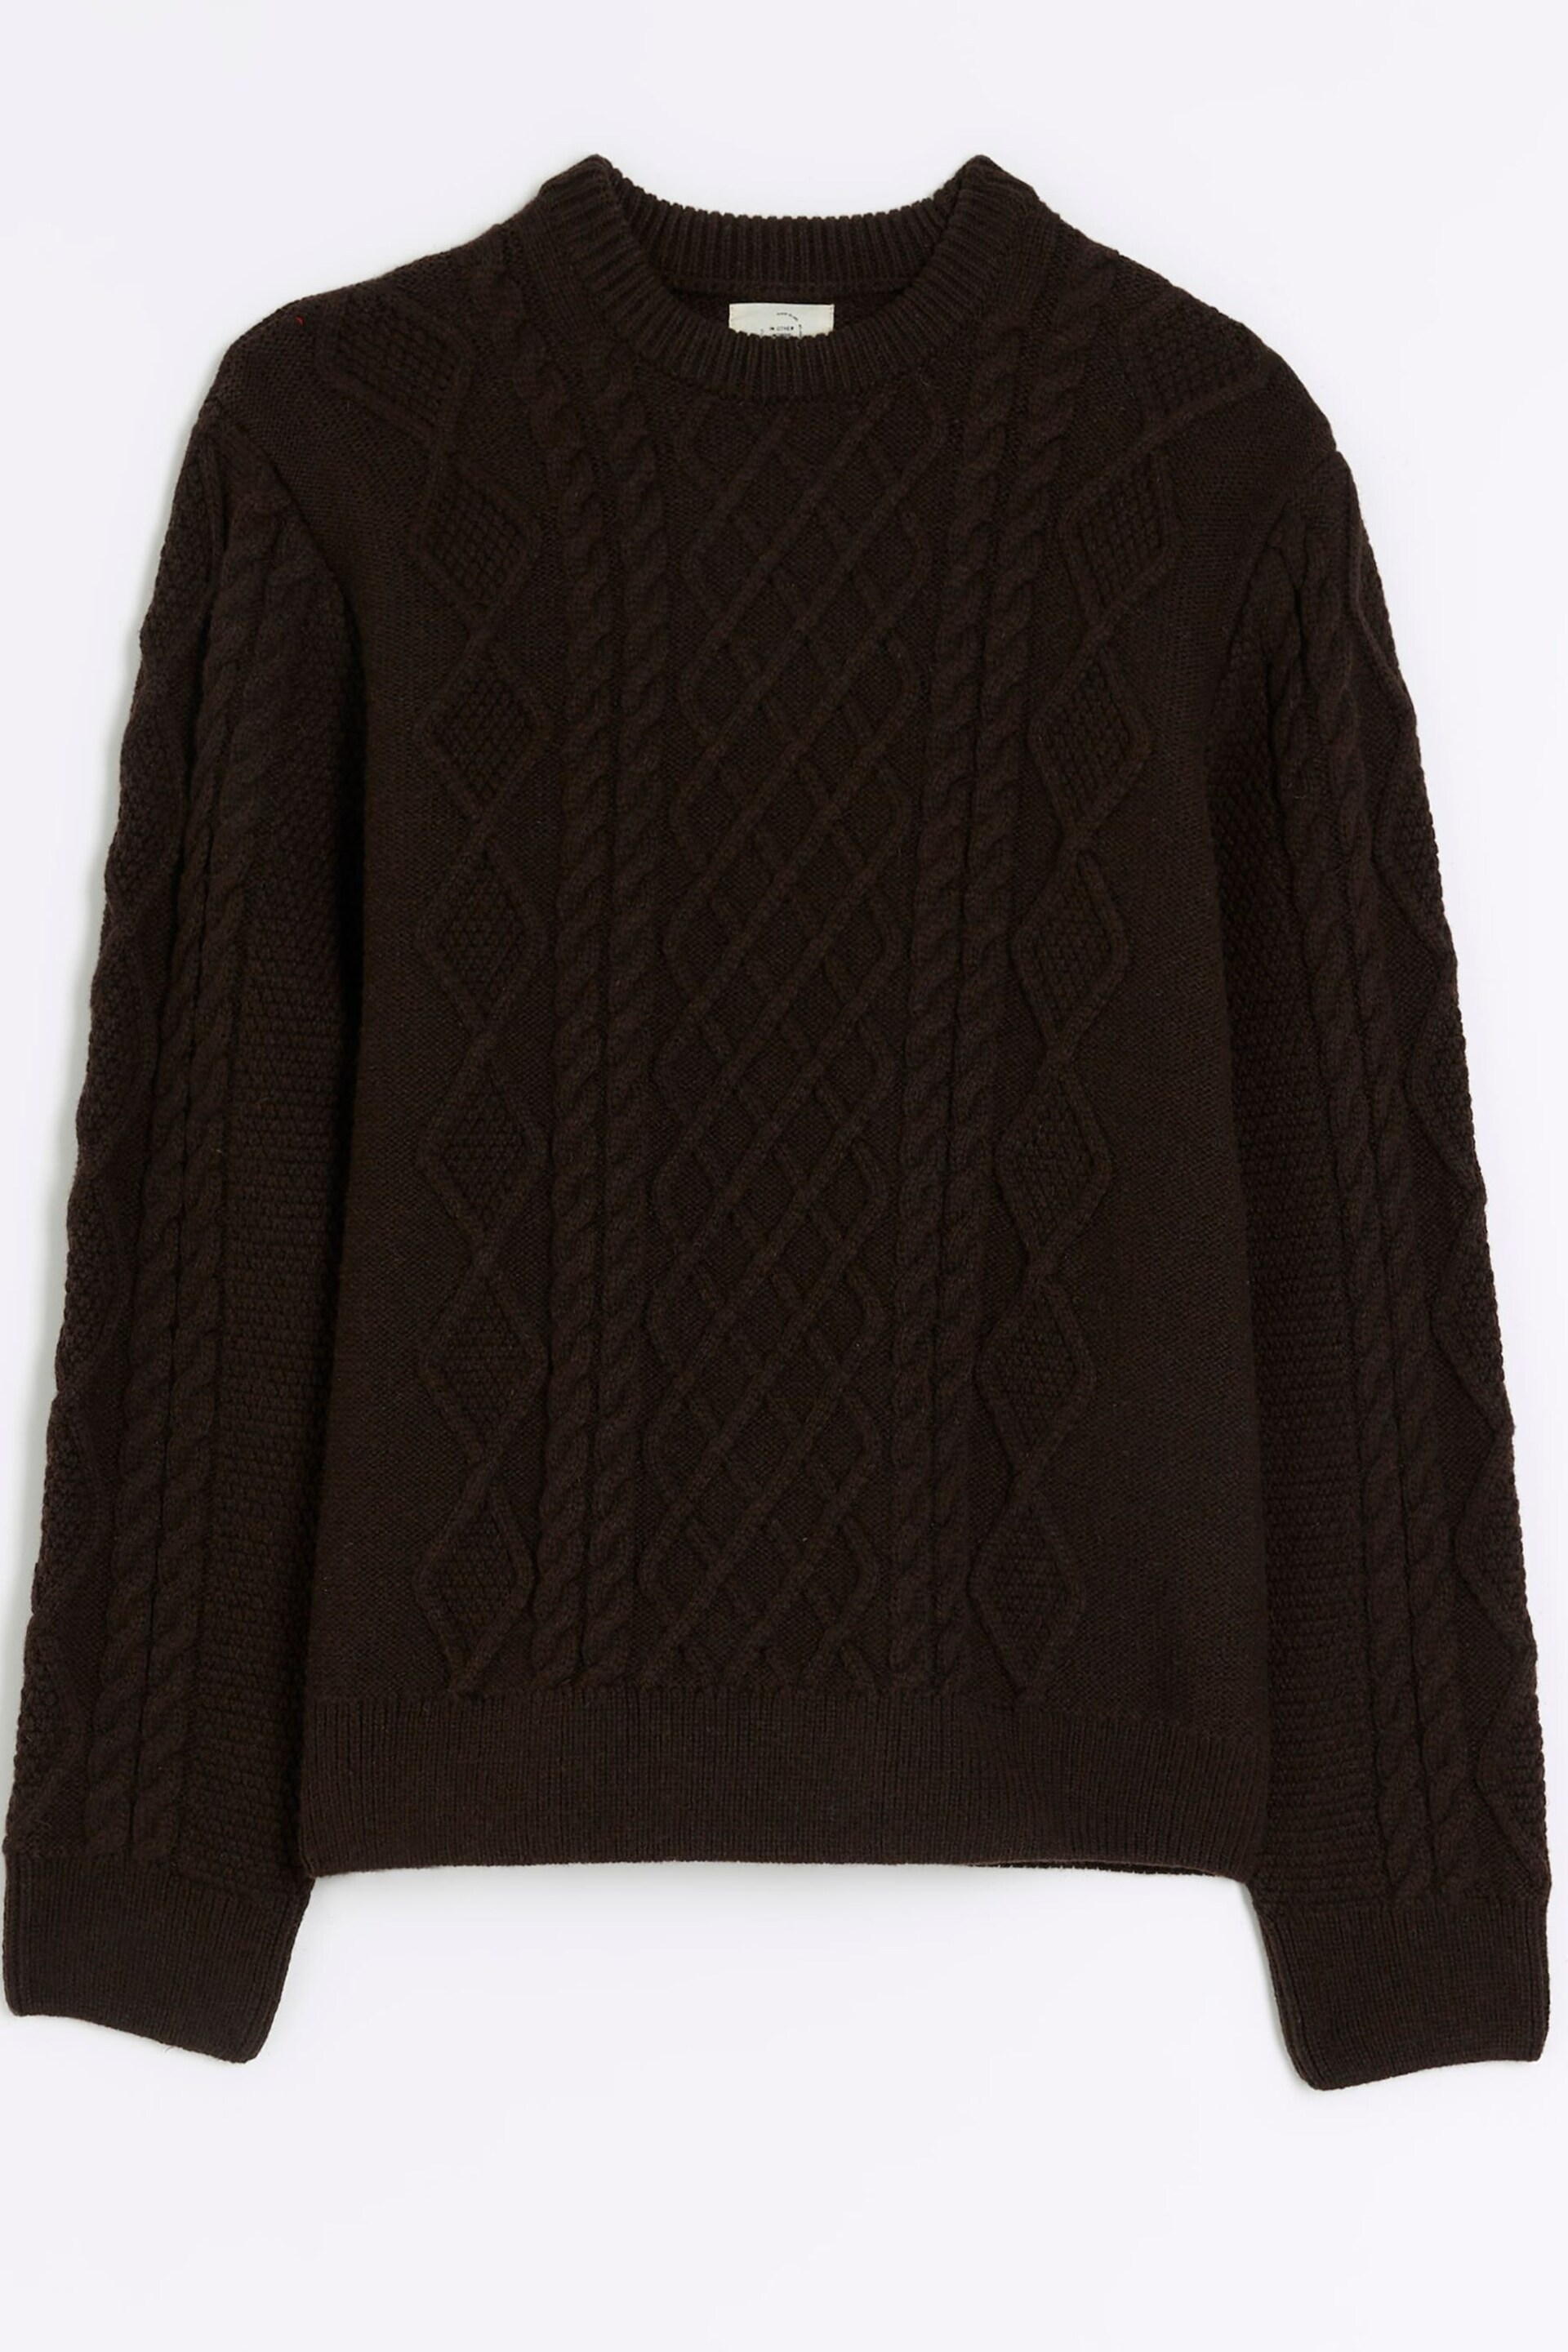 River Island Brown Cable Crewneck Jumper - Image 4 of 4